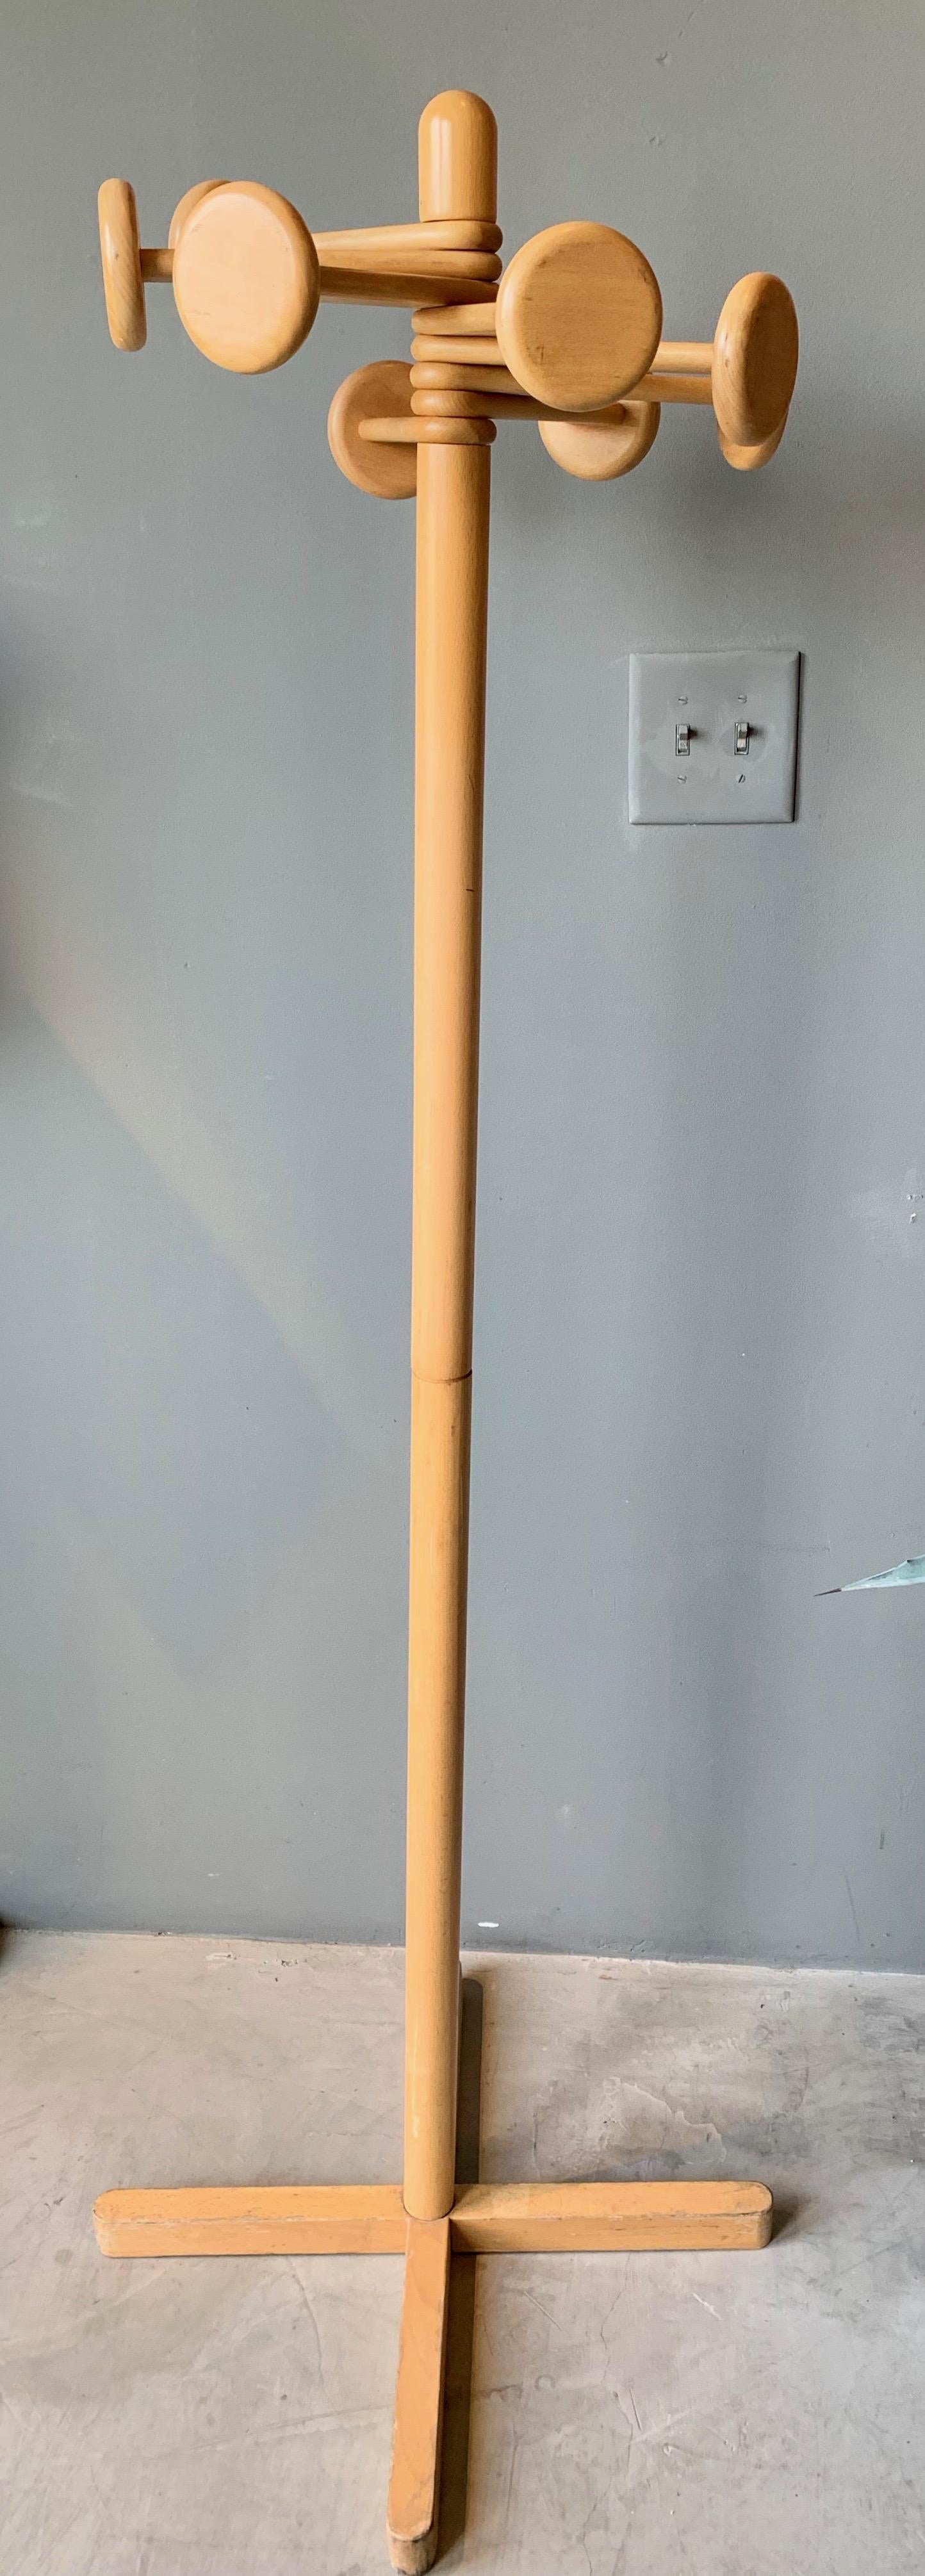 Late 20th Century Articulated Wood Coat Rack For Sale